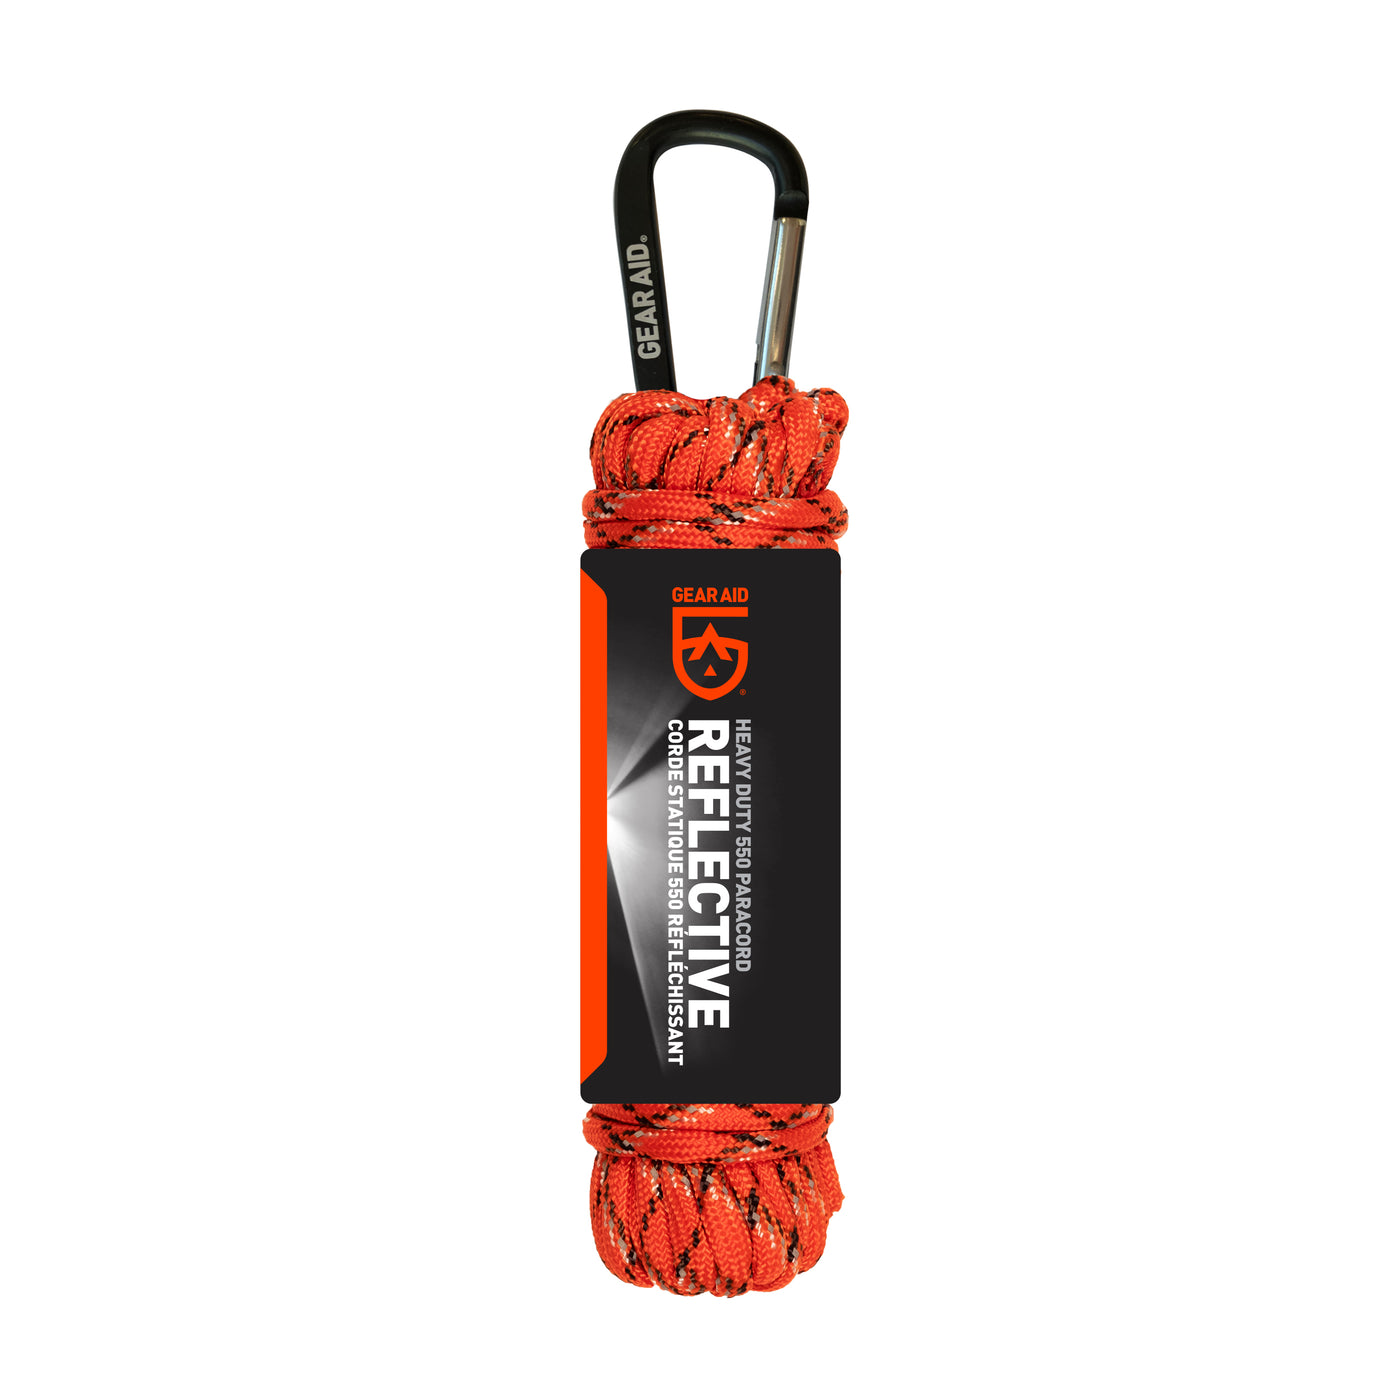 Gear Aid 550 Paracord 100 ft-Black/Reflective